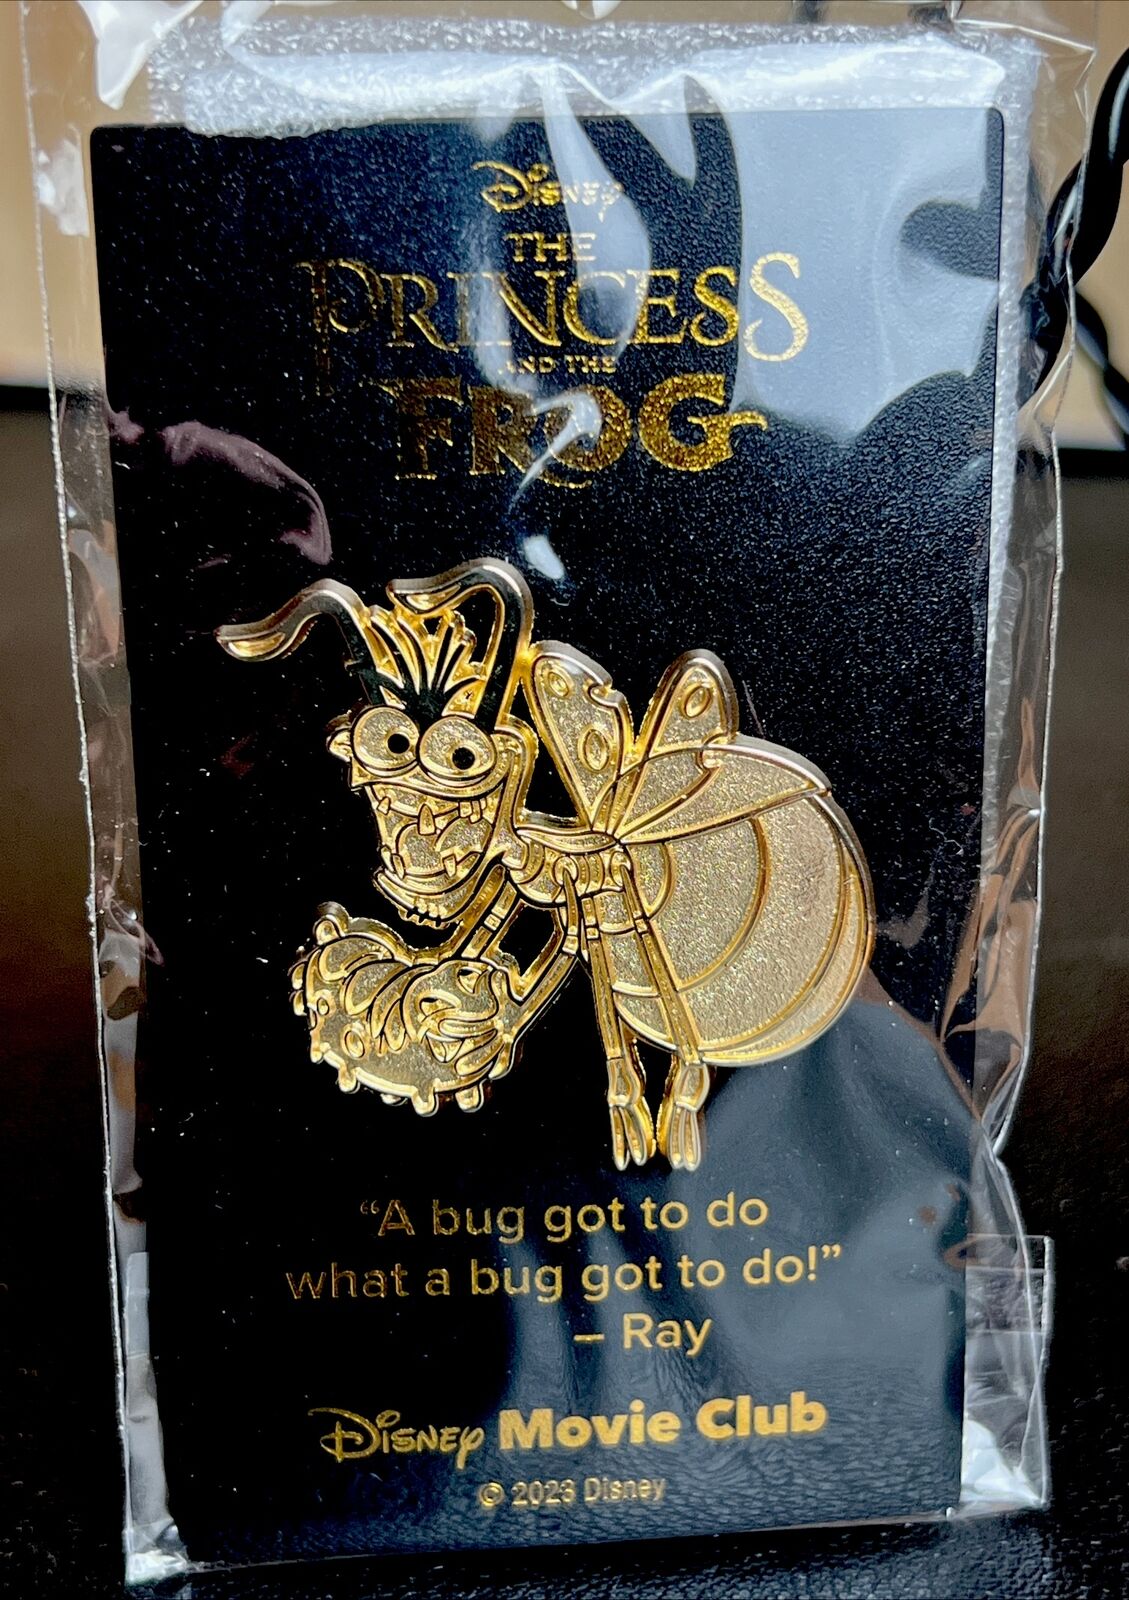 The Princess and the Frog-RAY  Pin Disney Movie Club Anniversary Exclusive DMC